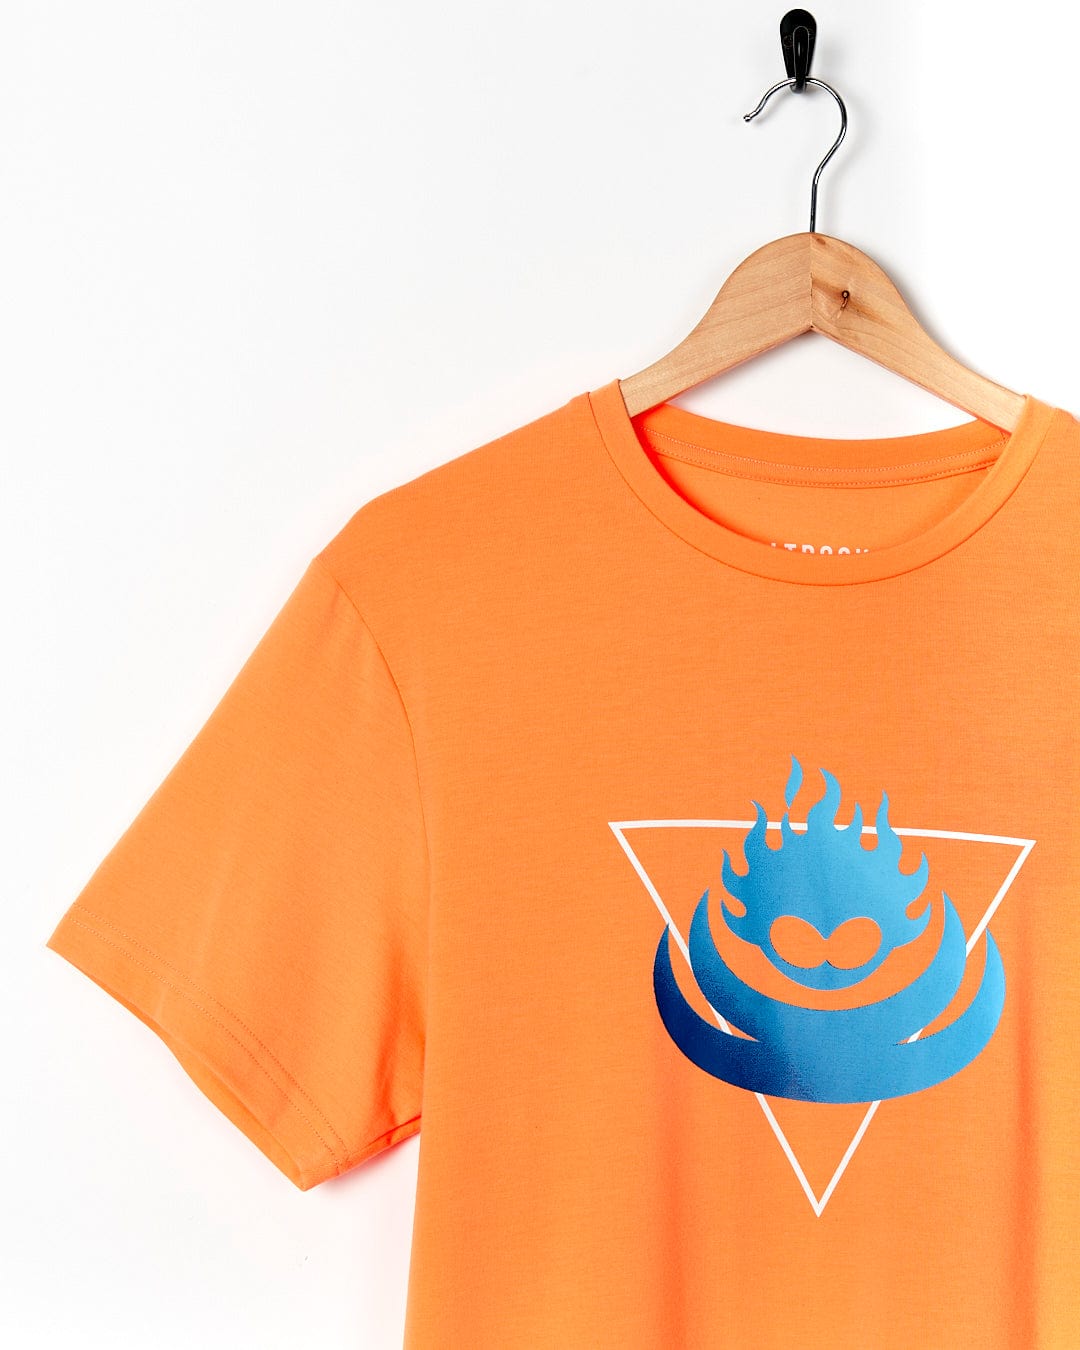 A Saltrock Flame Tri - Mens Recycled Short Sleeve T-Shirt - Light Orange with a blue flame on it.